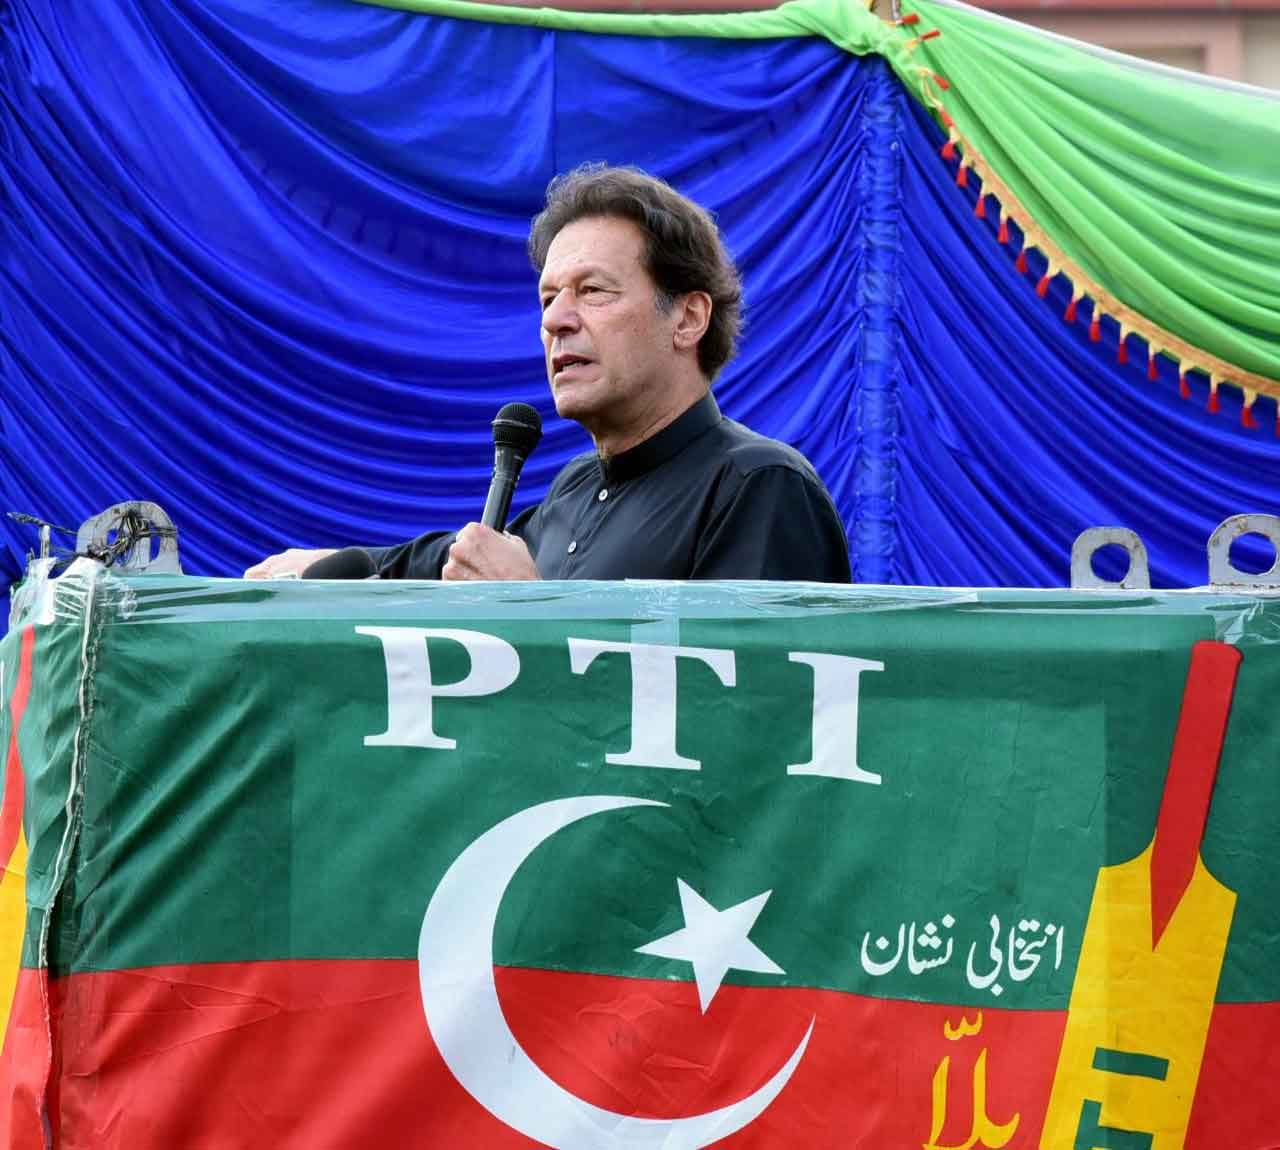 Prime Minister Imran Khan addressing an election campaign rally in Tarar Khel, Azad Jammu and Kashmir, on July 23, 2021. — PTI